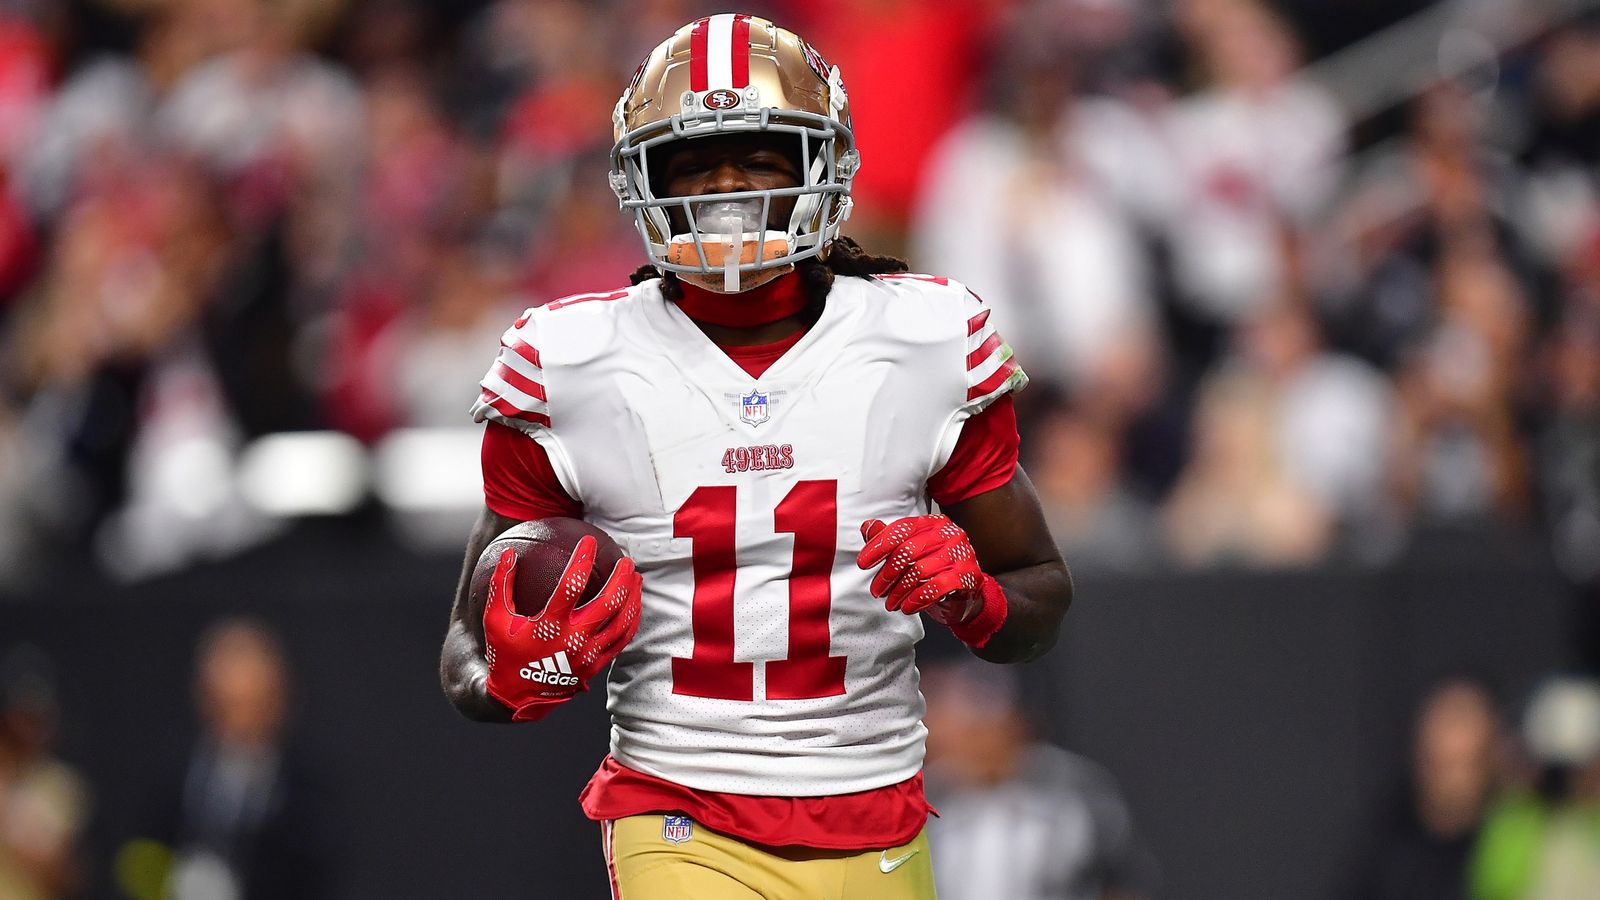 After a career-best season, WR Brandon Aiyuk Unfollow the 49ers on Instagram as the two sides continue to dispute a contract.